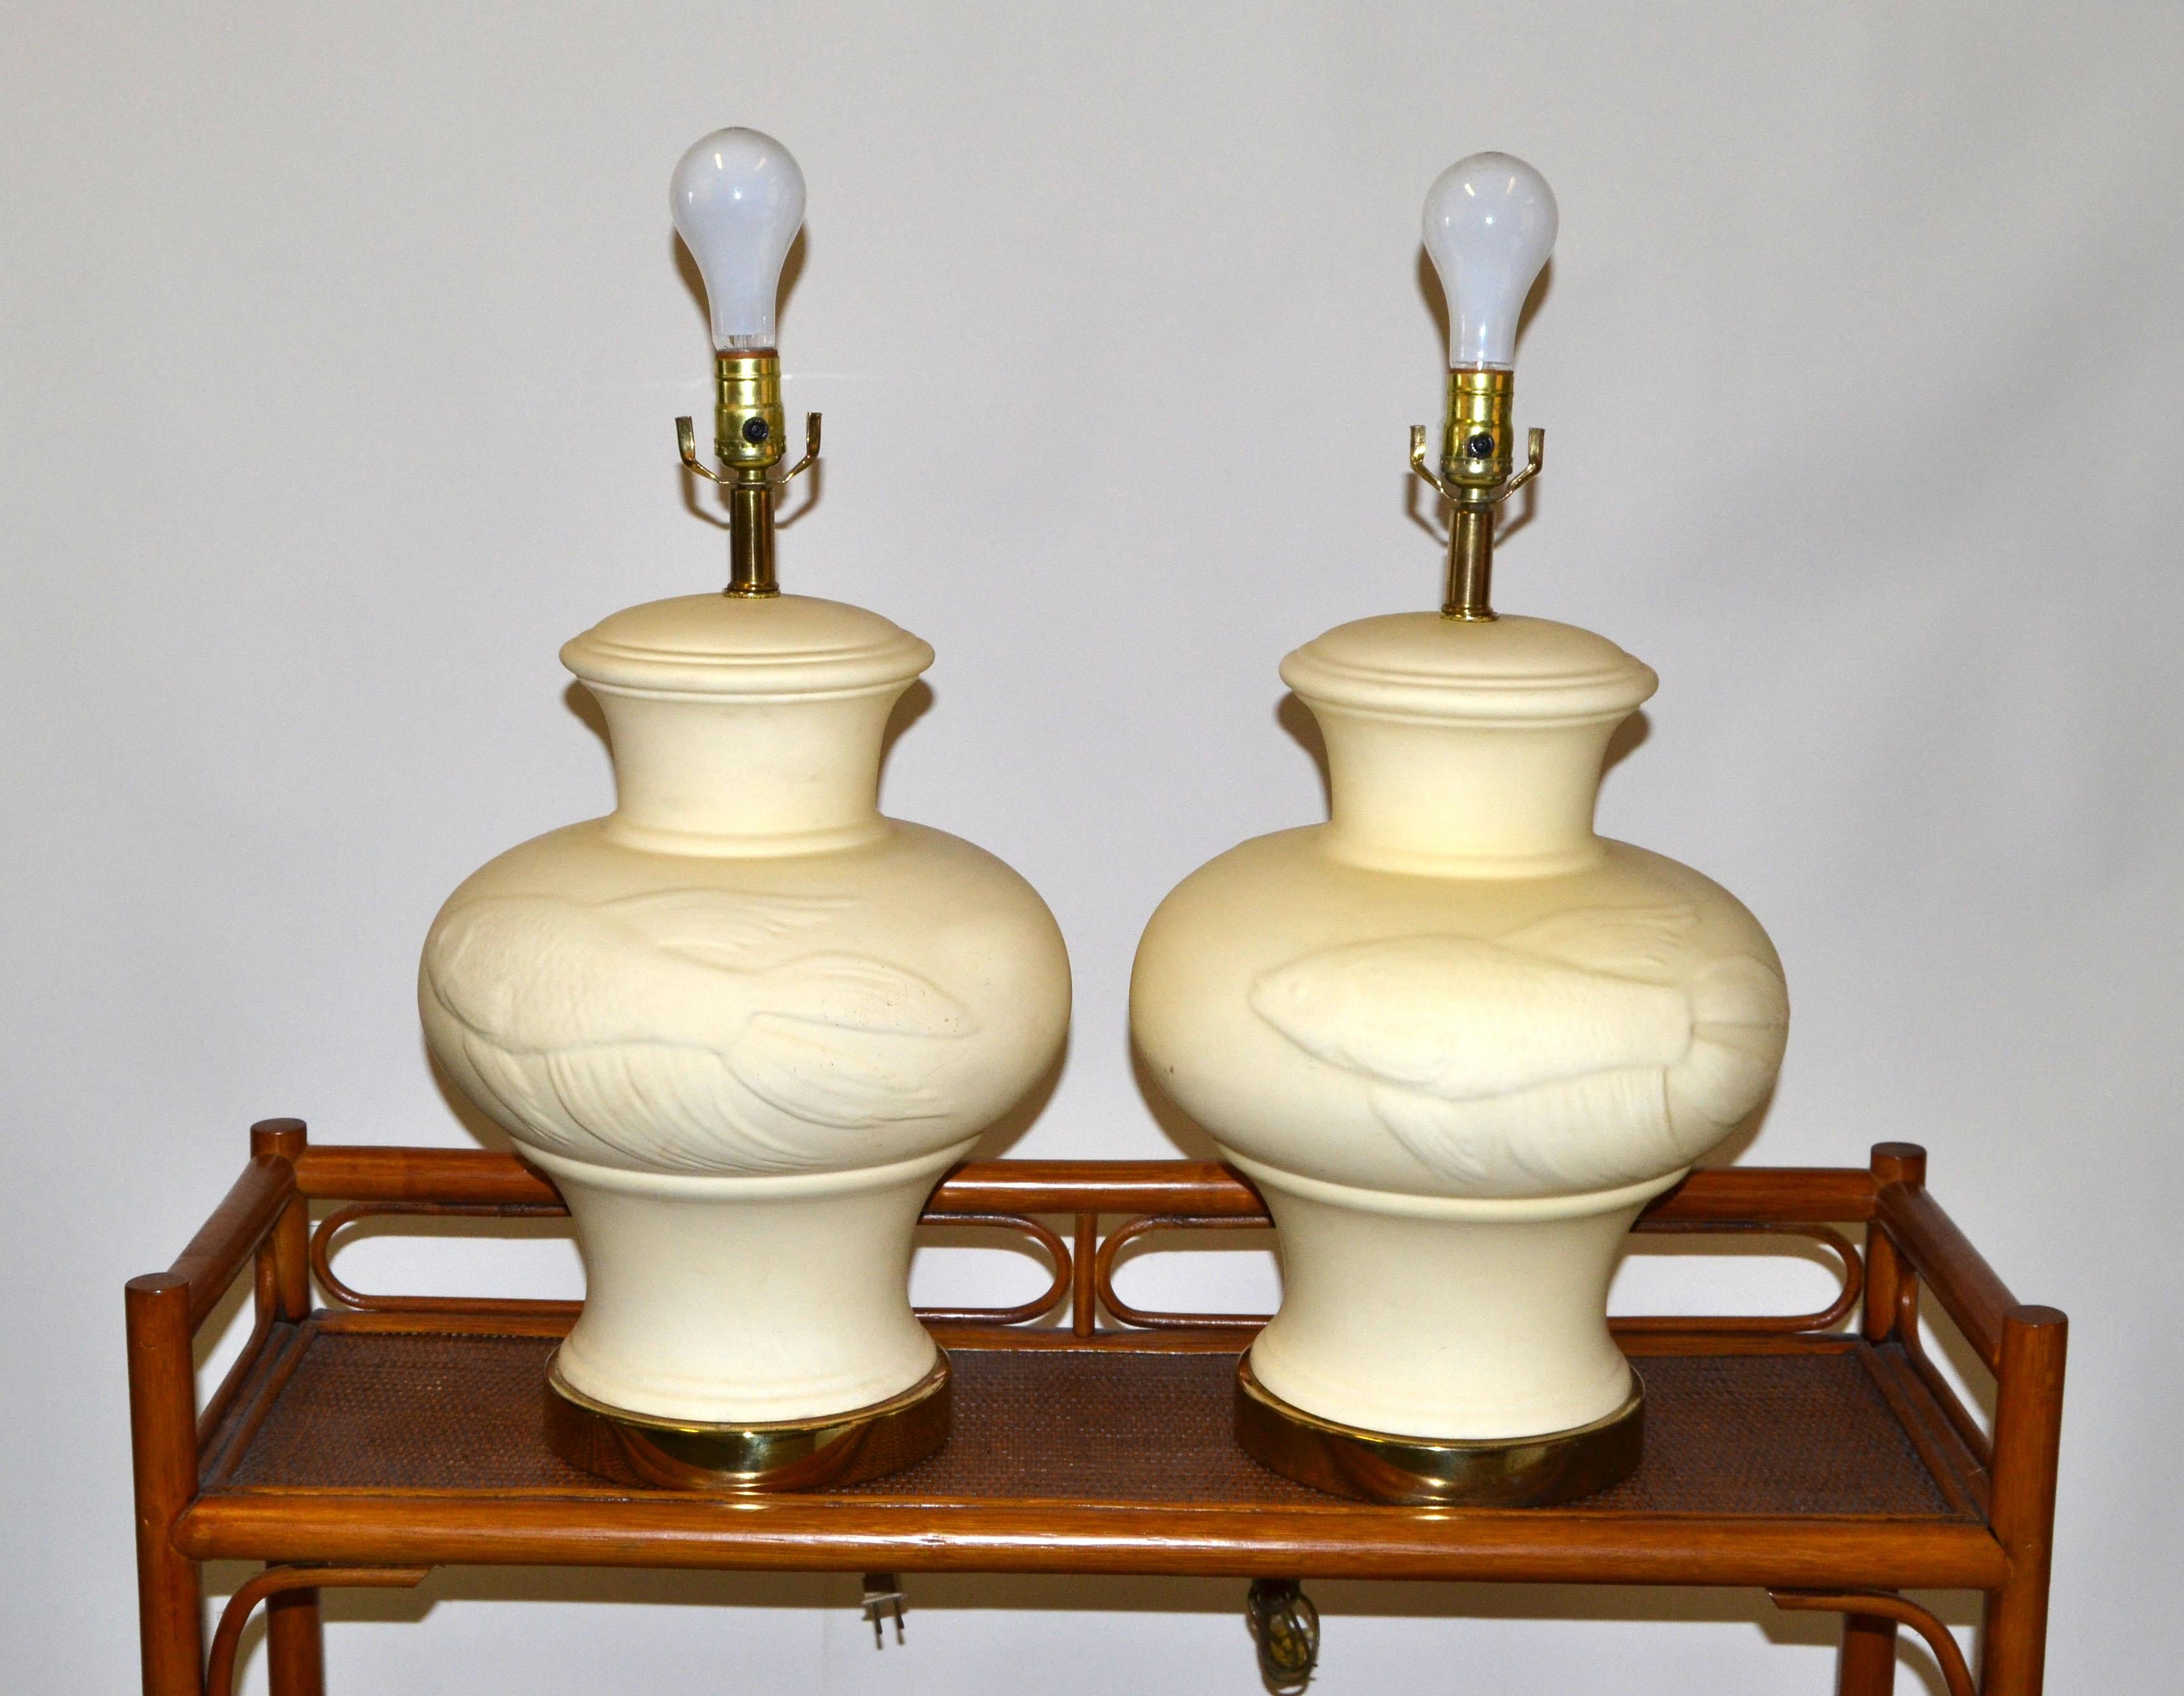 1970 Chinese Inspired Beige Ceramic & Brass Table Lamps with Koi Fish Image Pair For Sale 3